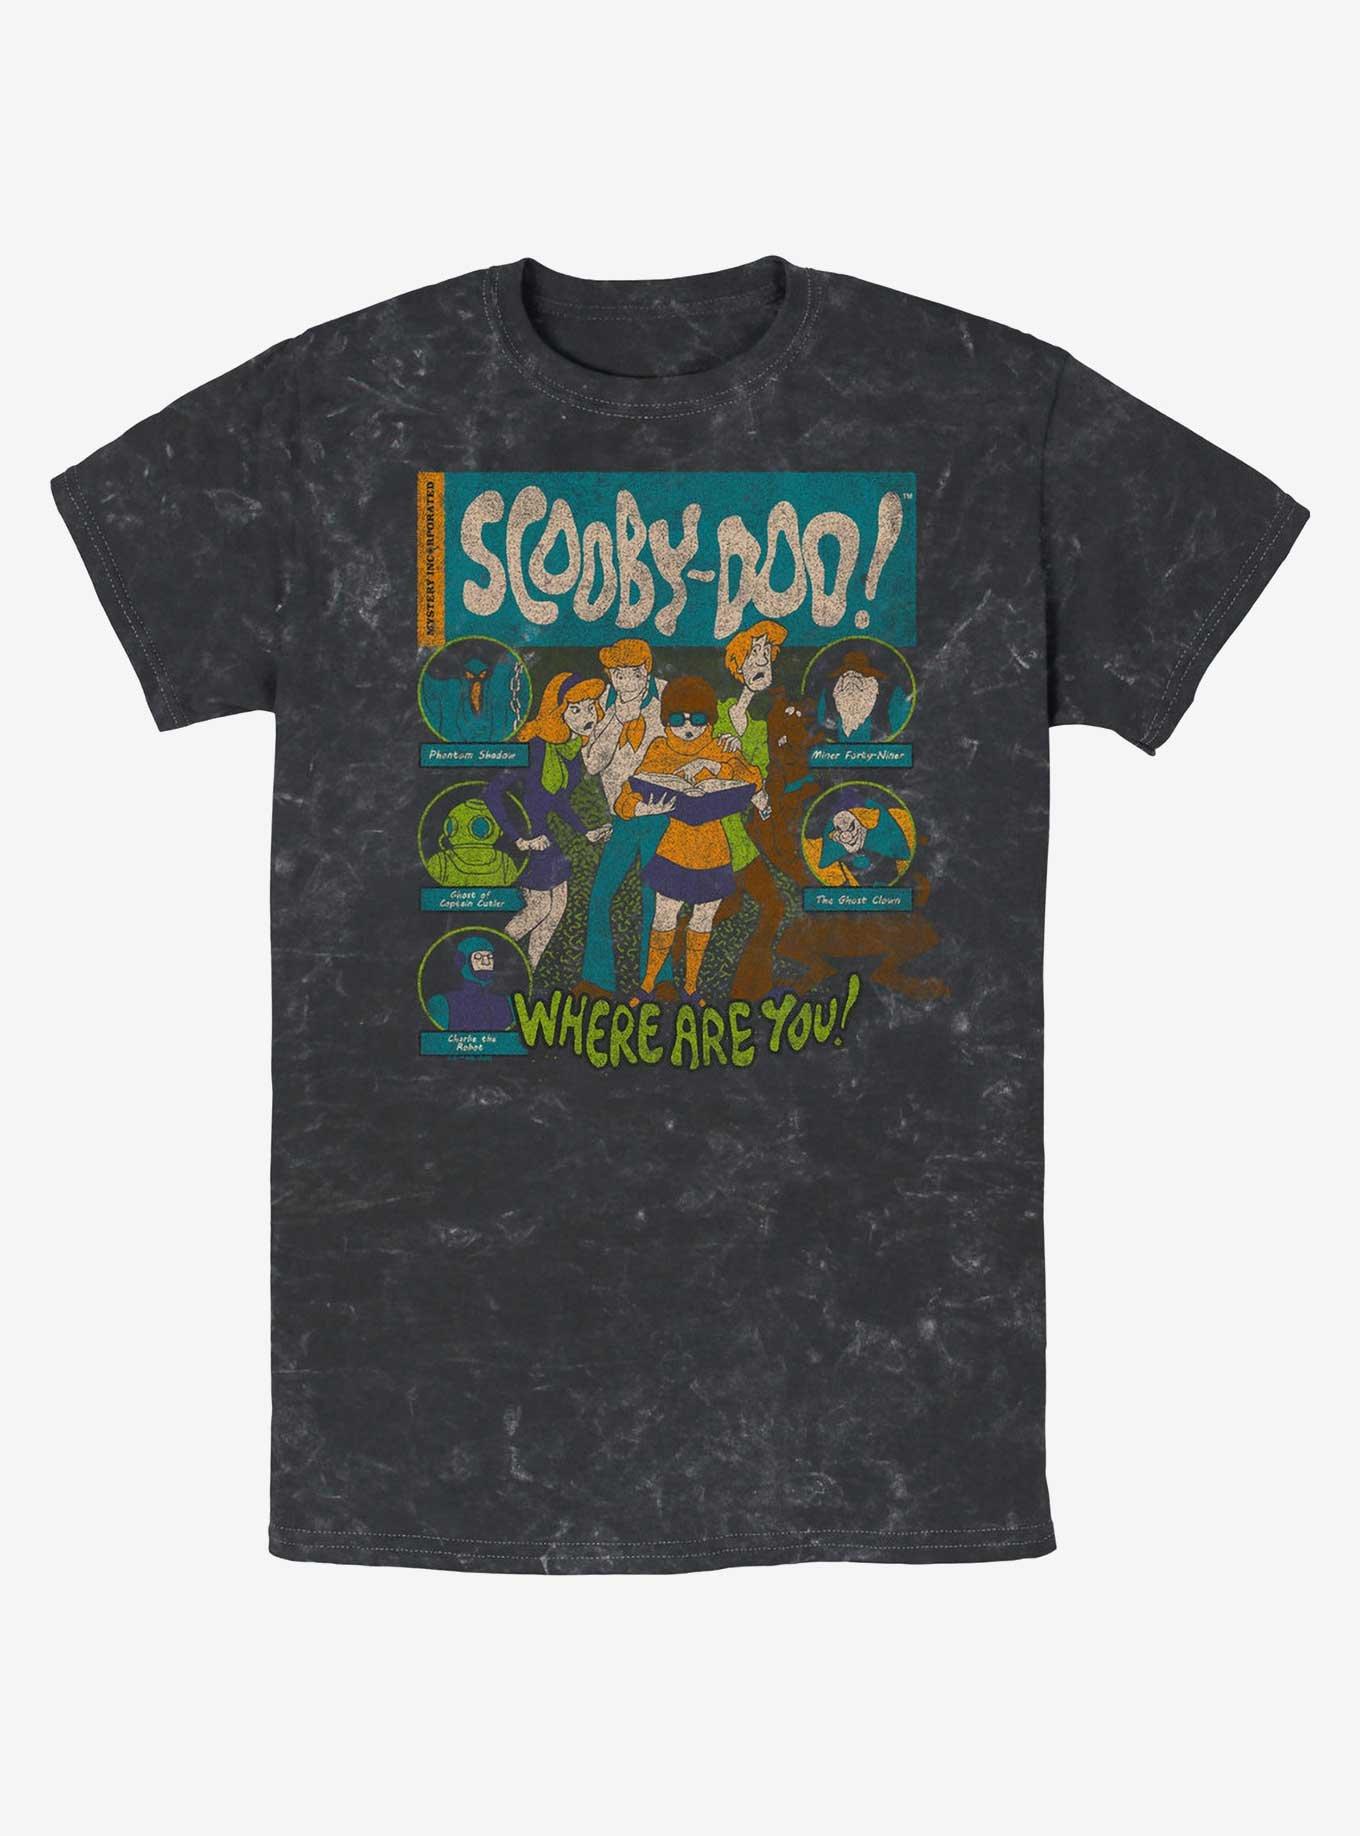 Scooby Doo Mystery Poster Mineral Wash T-Shirt, BLACK, hi-res